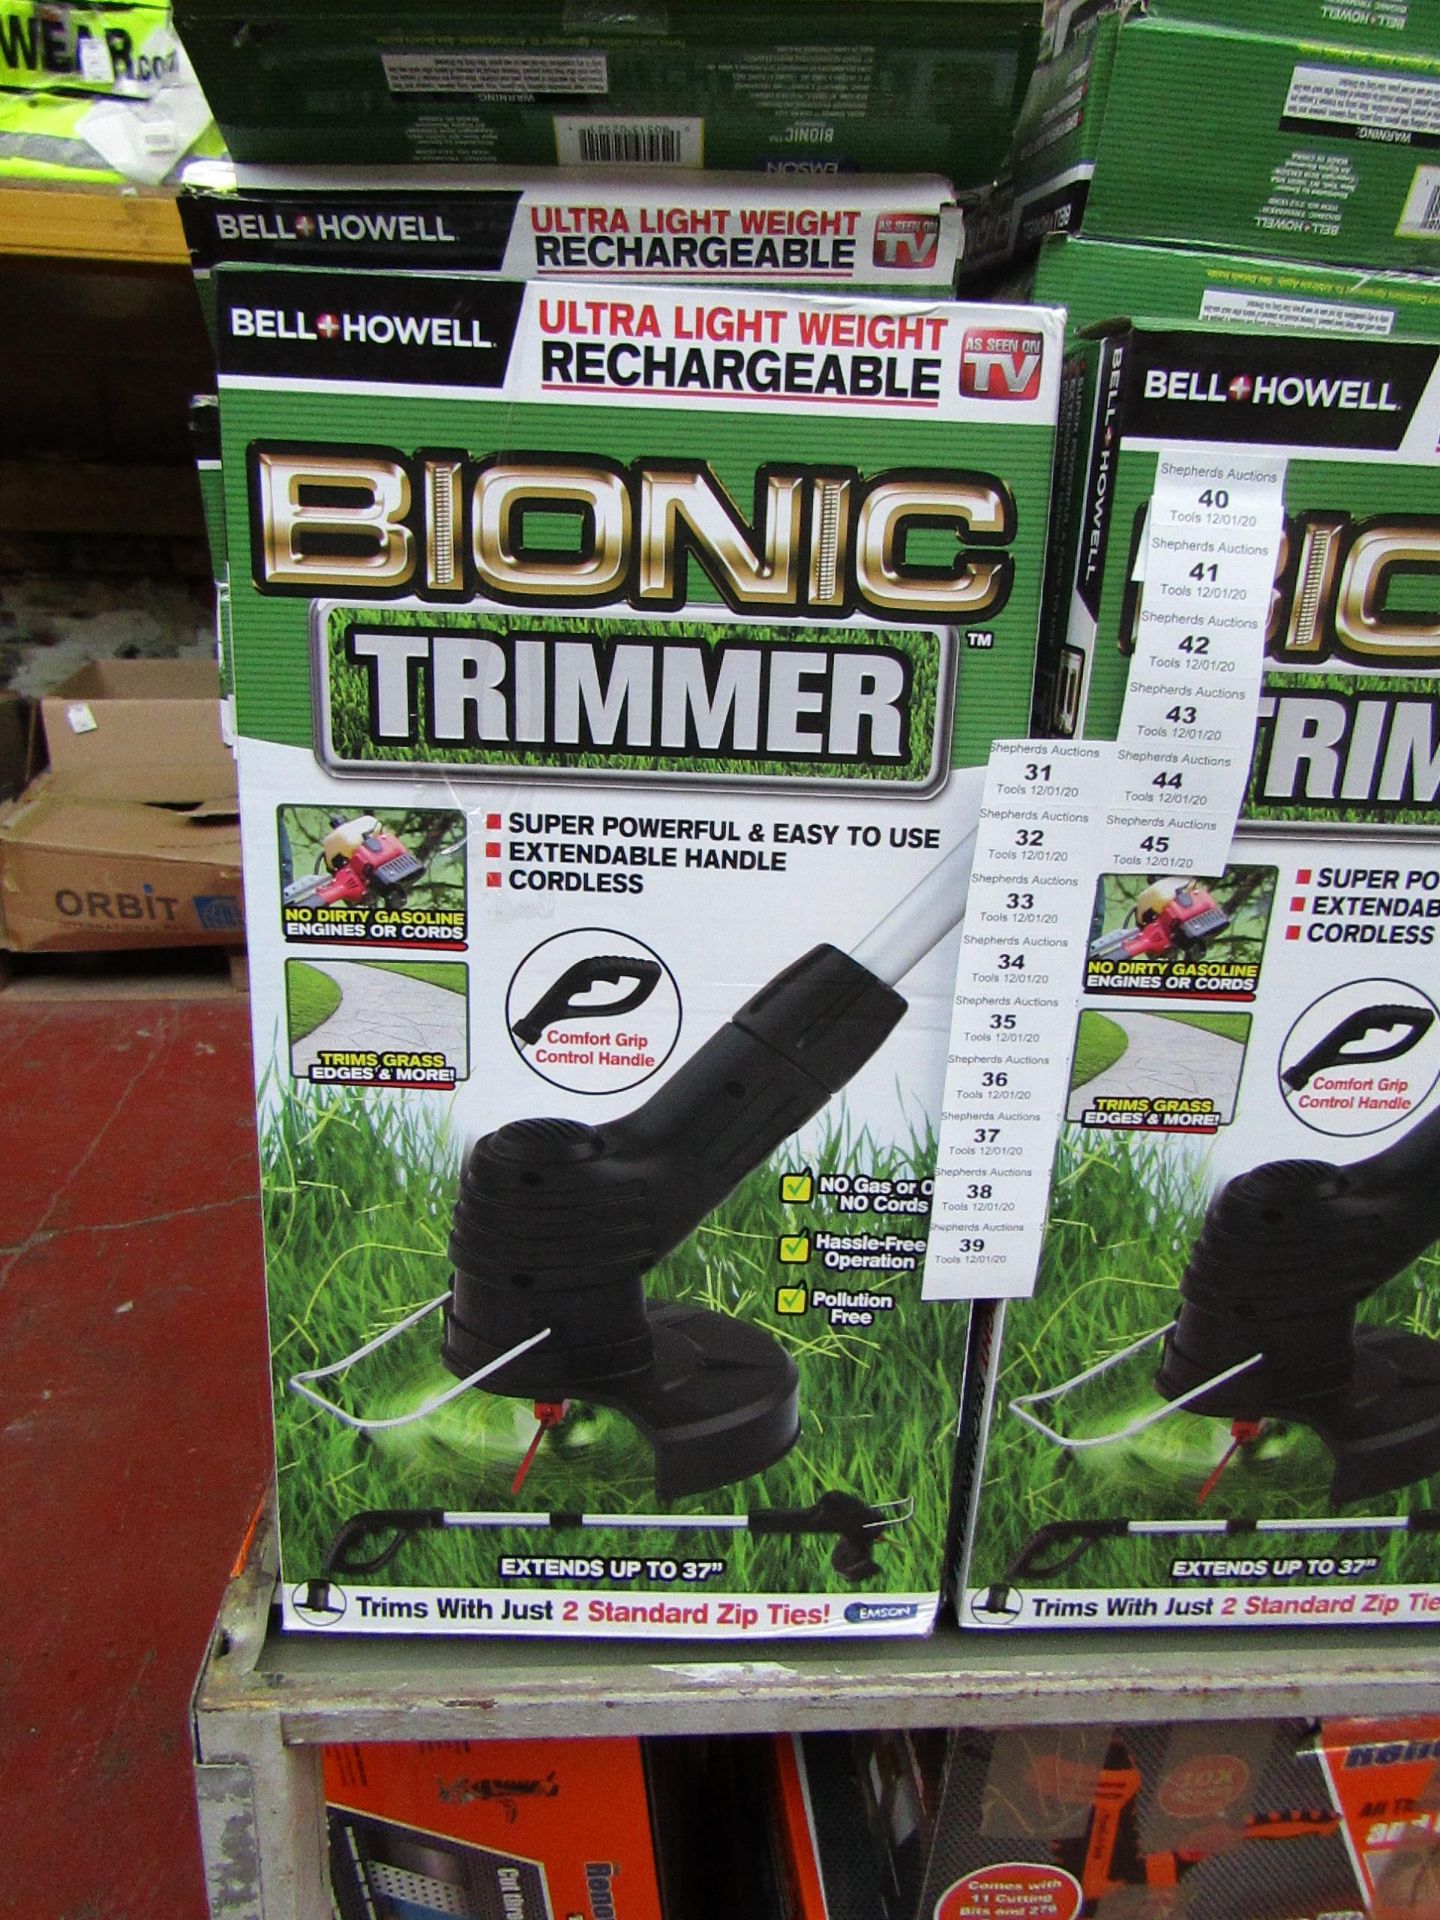 | 1x | Bell and Howell Bionic Trimmer | Tested working and boxed | no online Re-sale | SKU - |